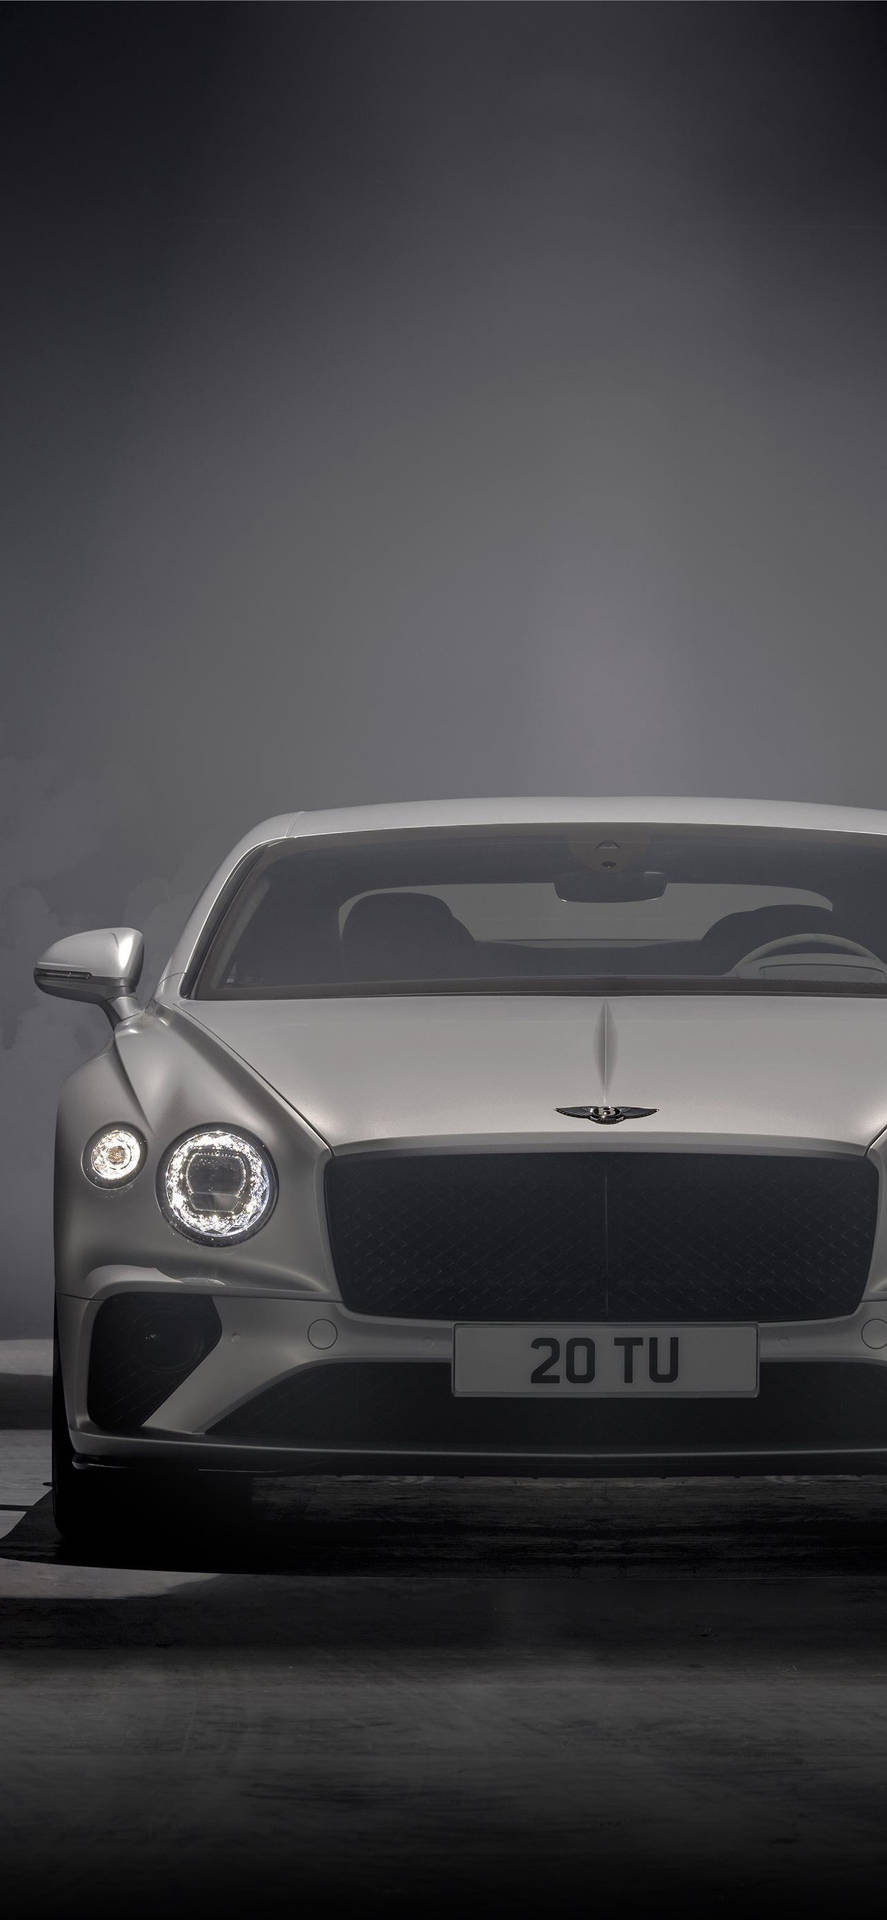 Bentley Car In Greyscale Iphone Background